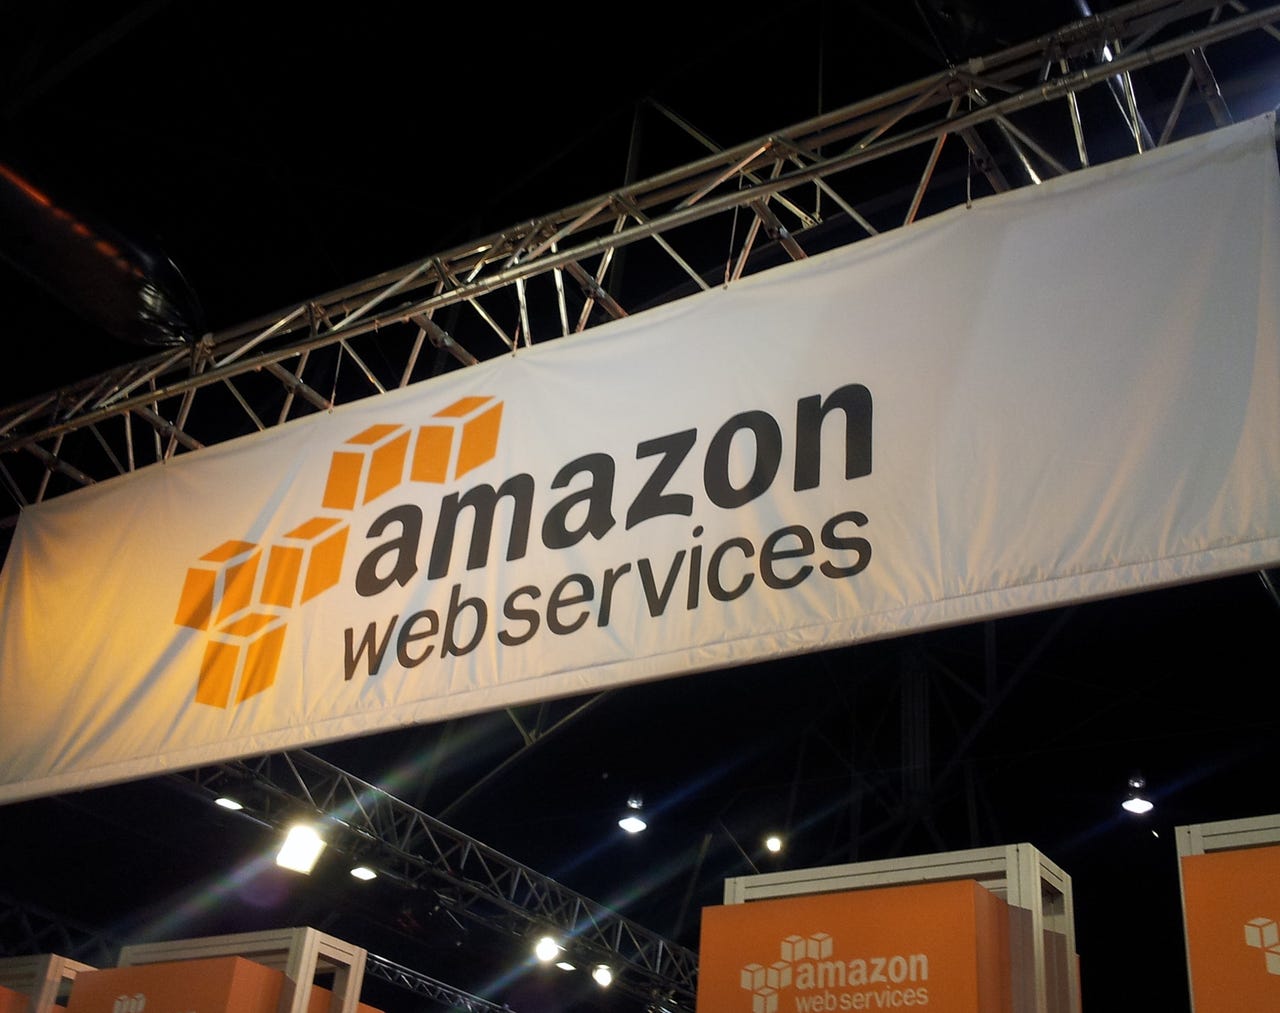 vodafone-ramps-up-software-deployment-in-cloud-shift-aws-summit.jpg